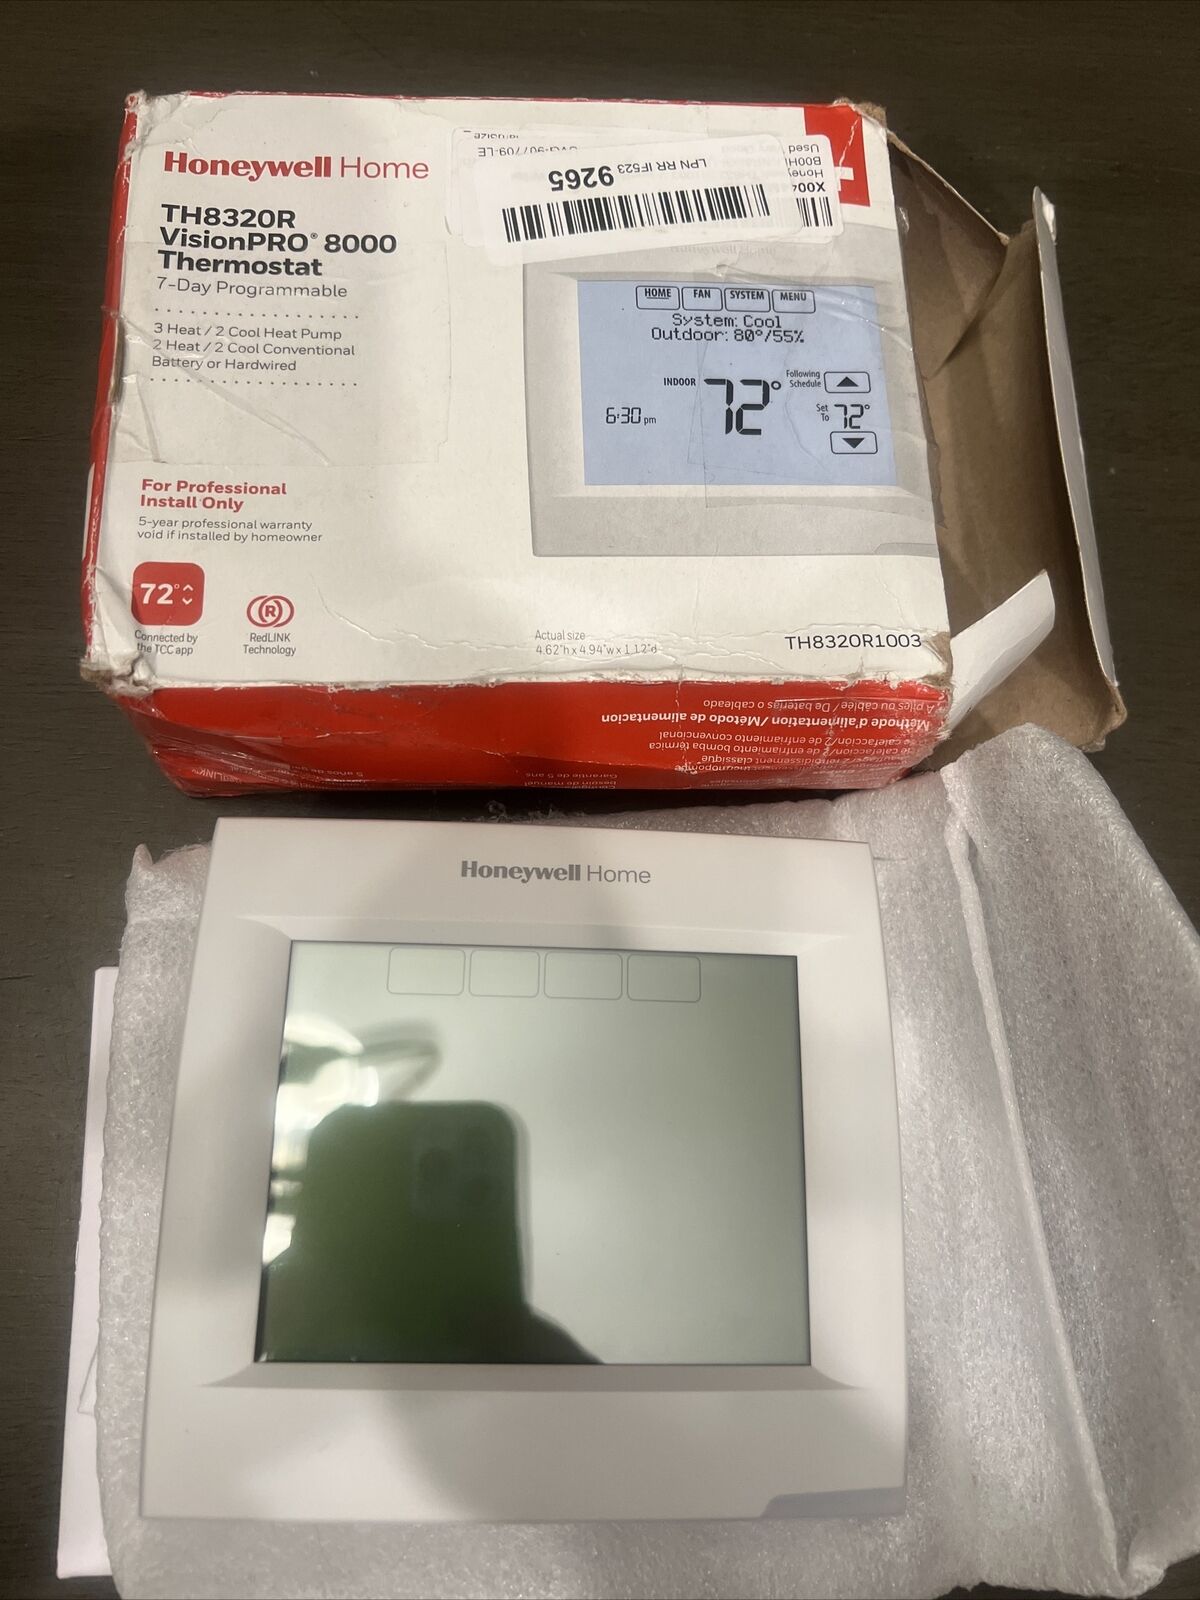 Honeywell VisionPRO 8000 with RedLINK Programmable Thermostat (TH8320R1003)